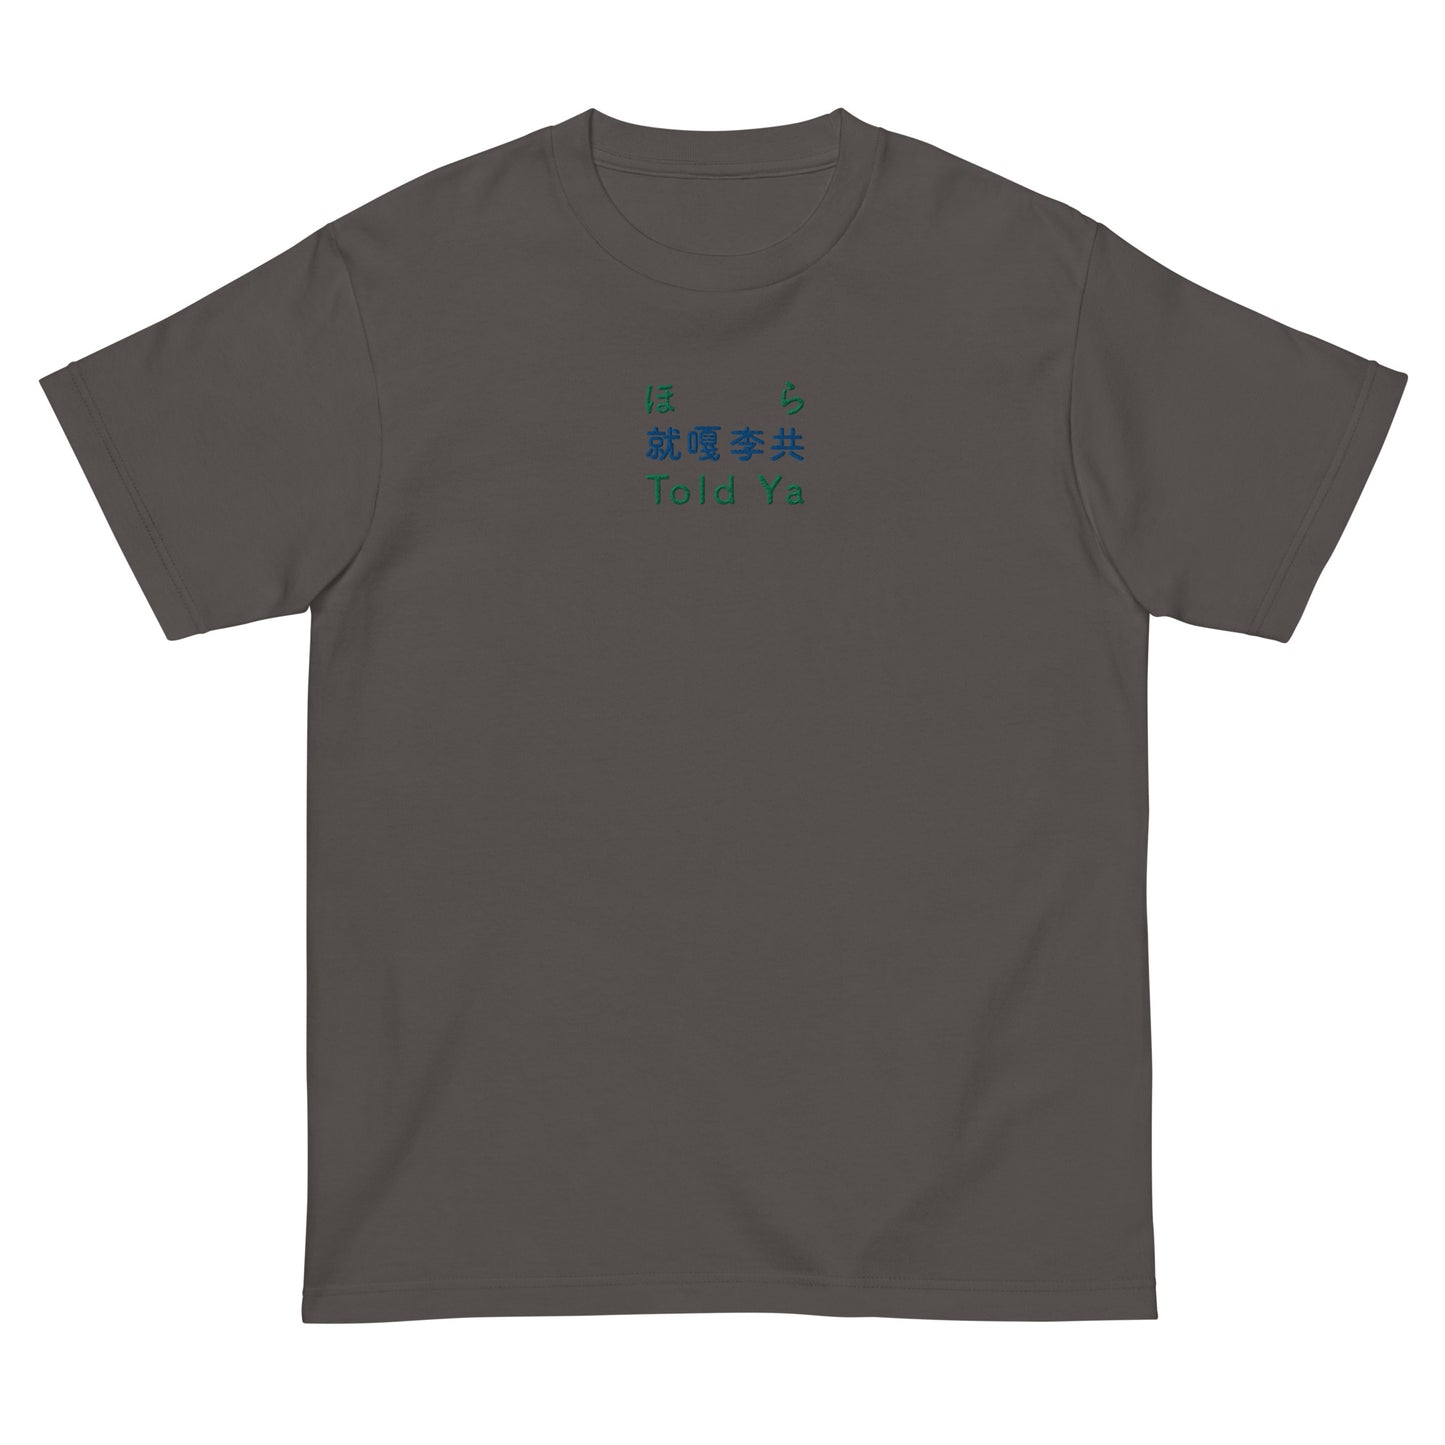 Dark Gray High Quality Tee - Front Design with an Blue,Green Embroidery "Told Ya" in Japanese,Chinese and English